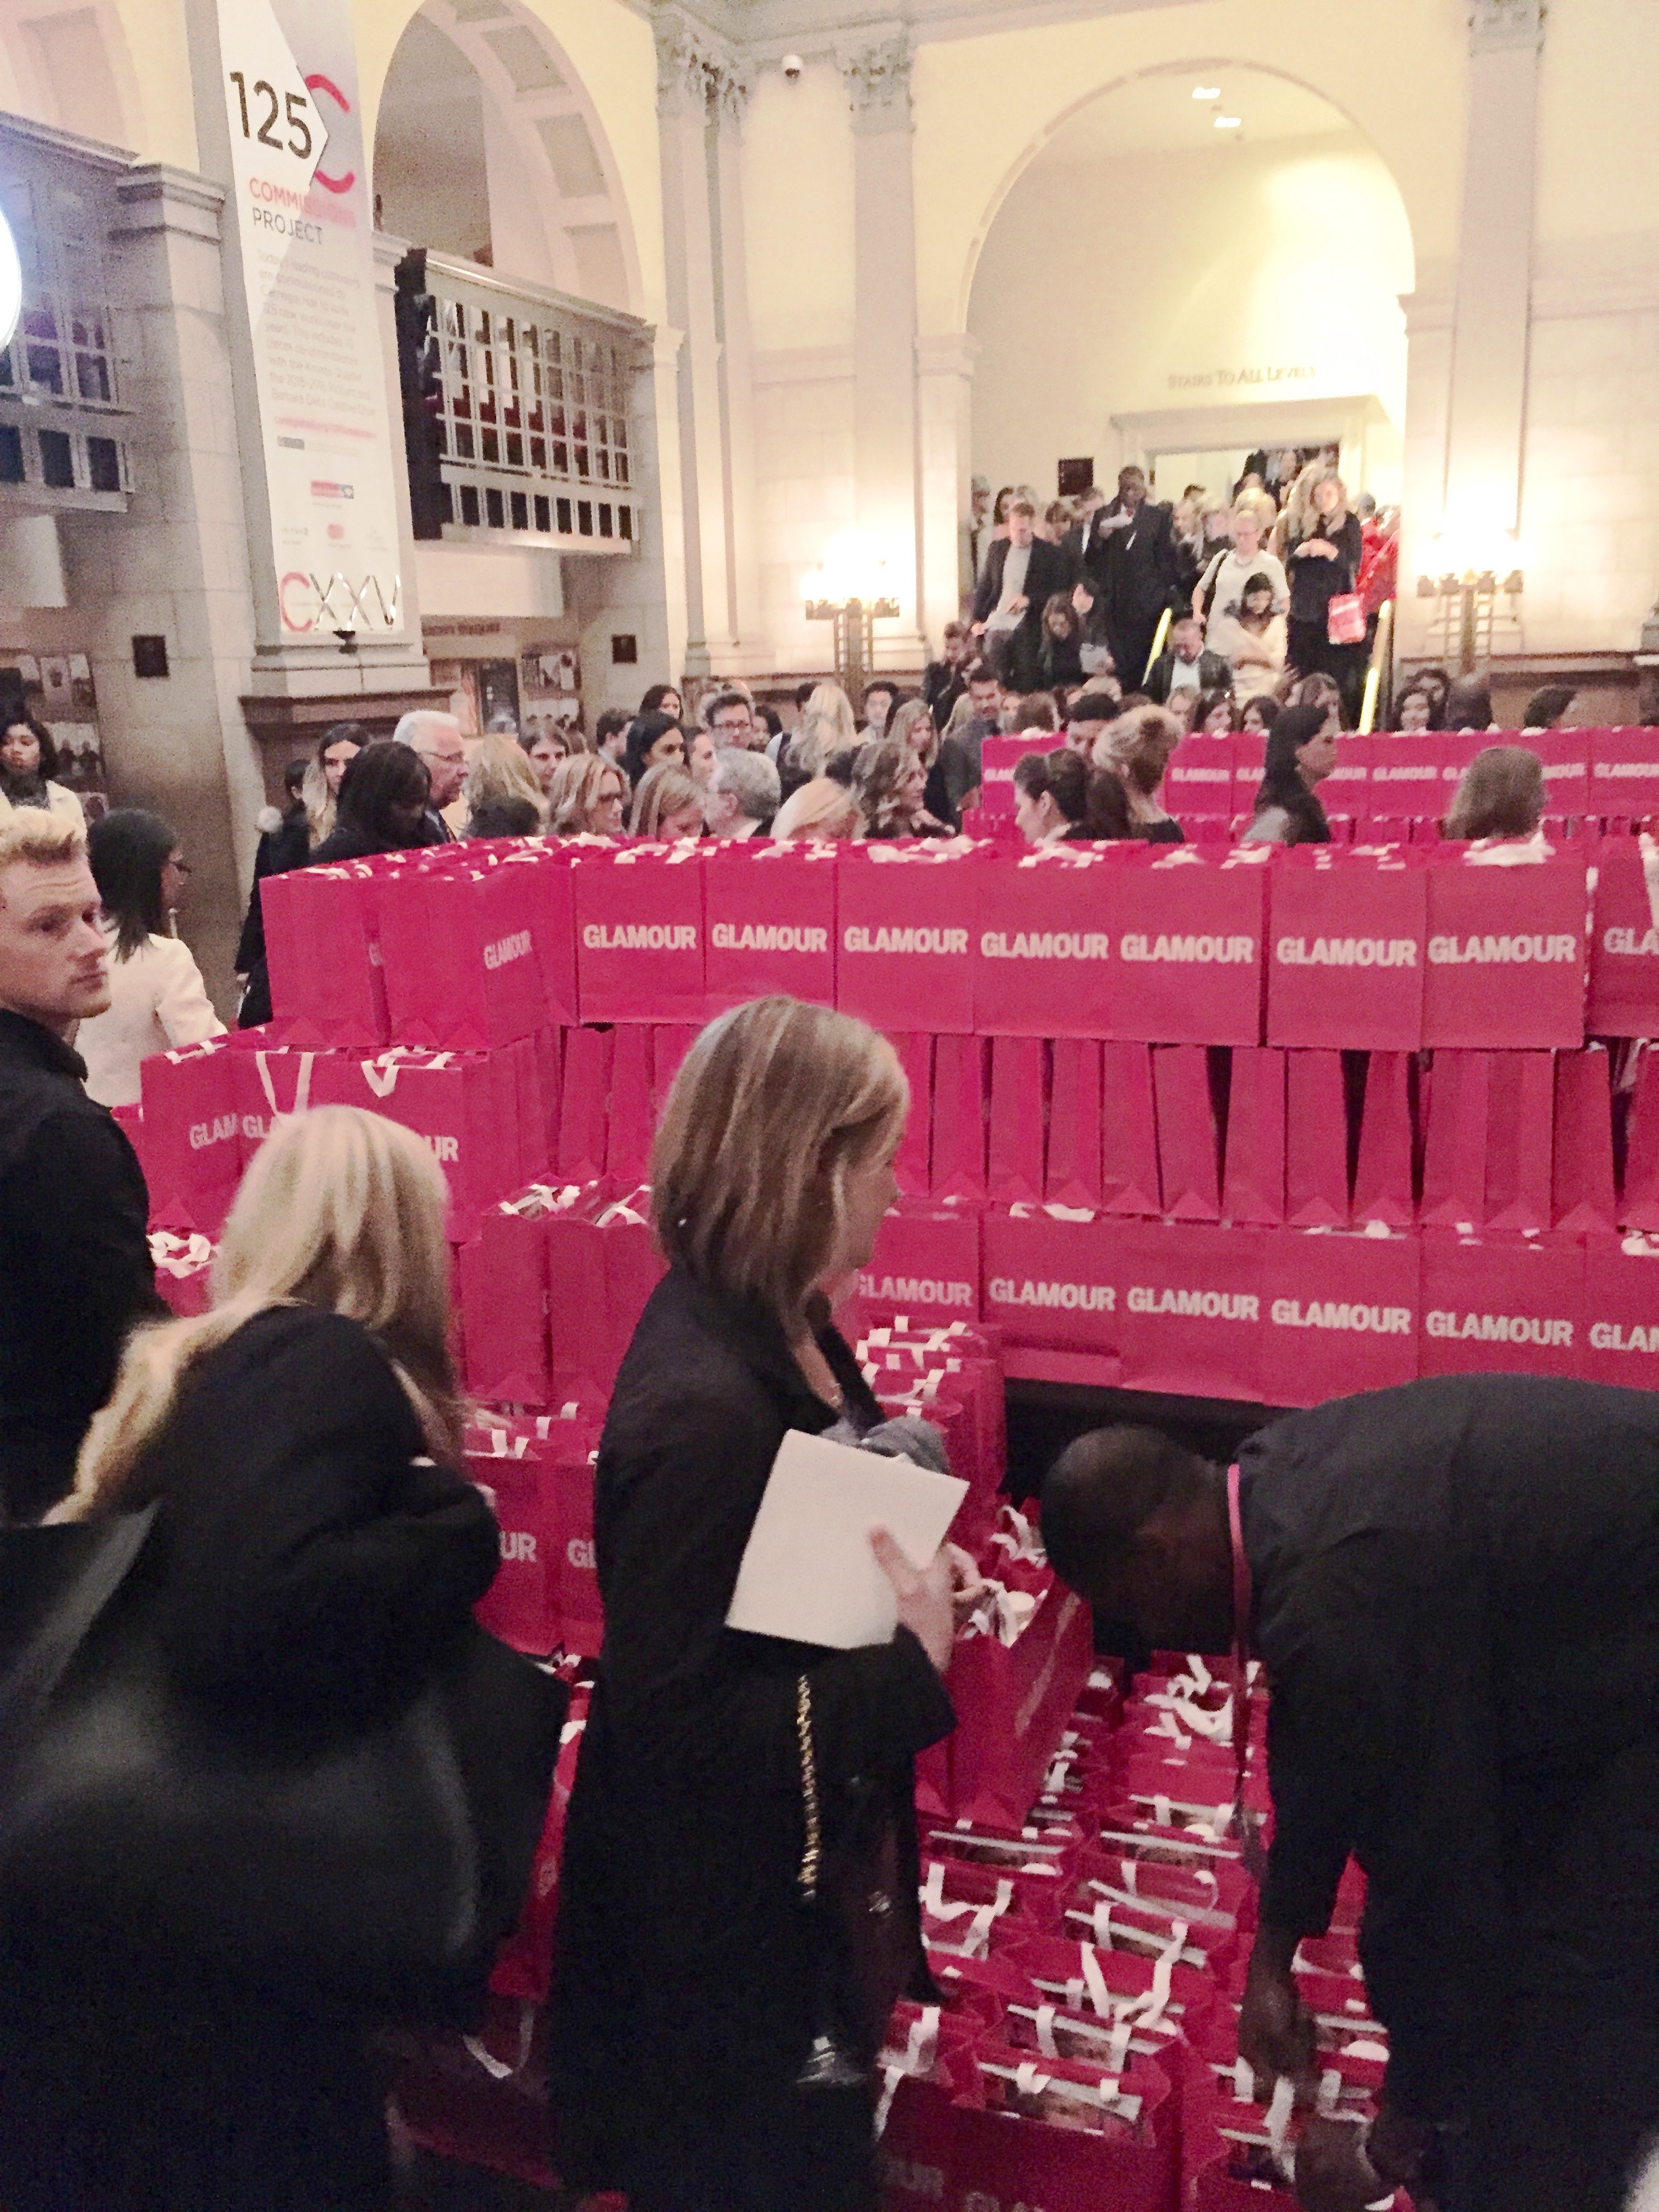 There was a mountain of pink gift bags.jpg